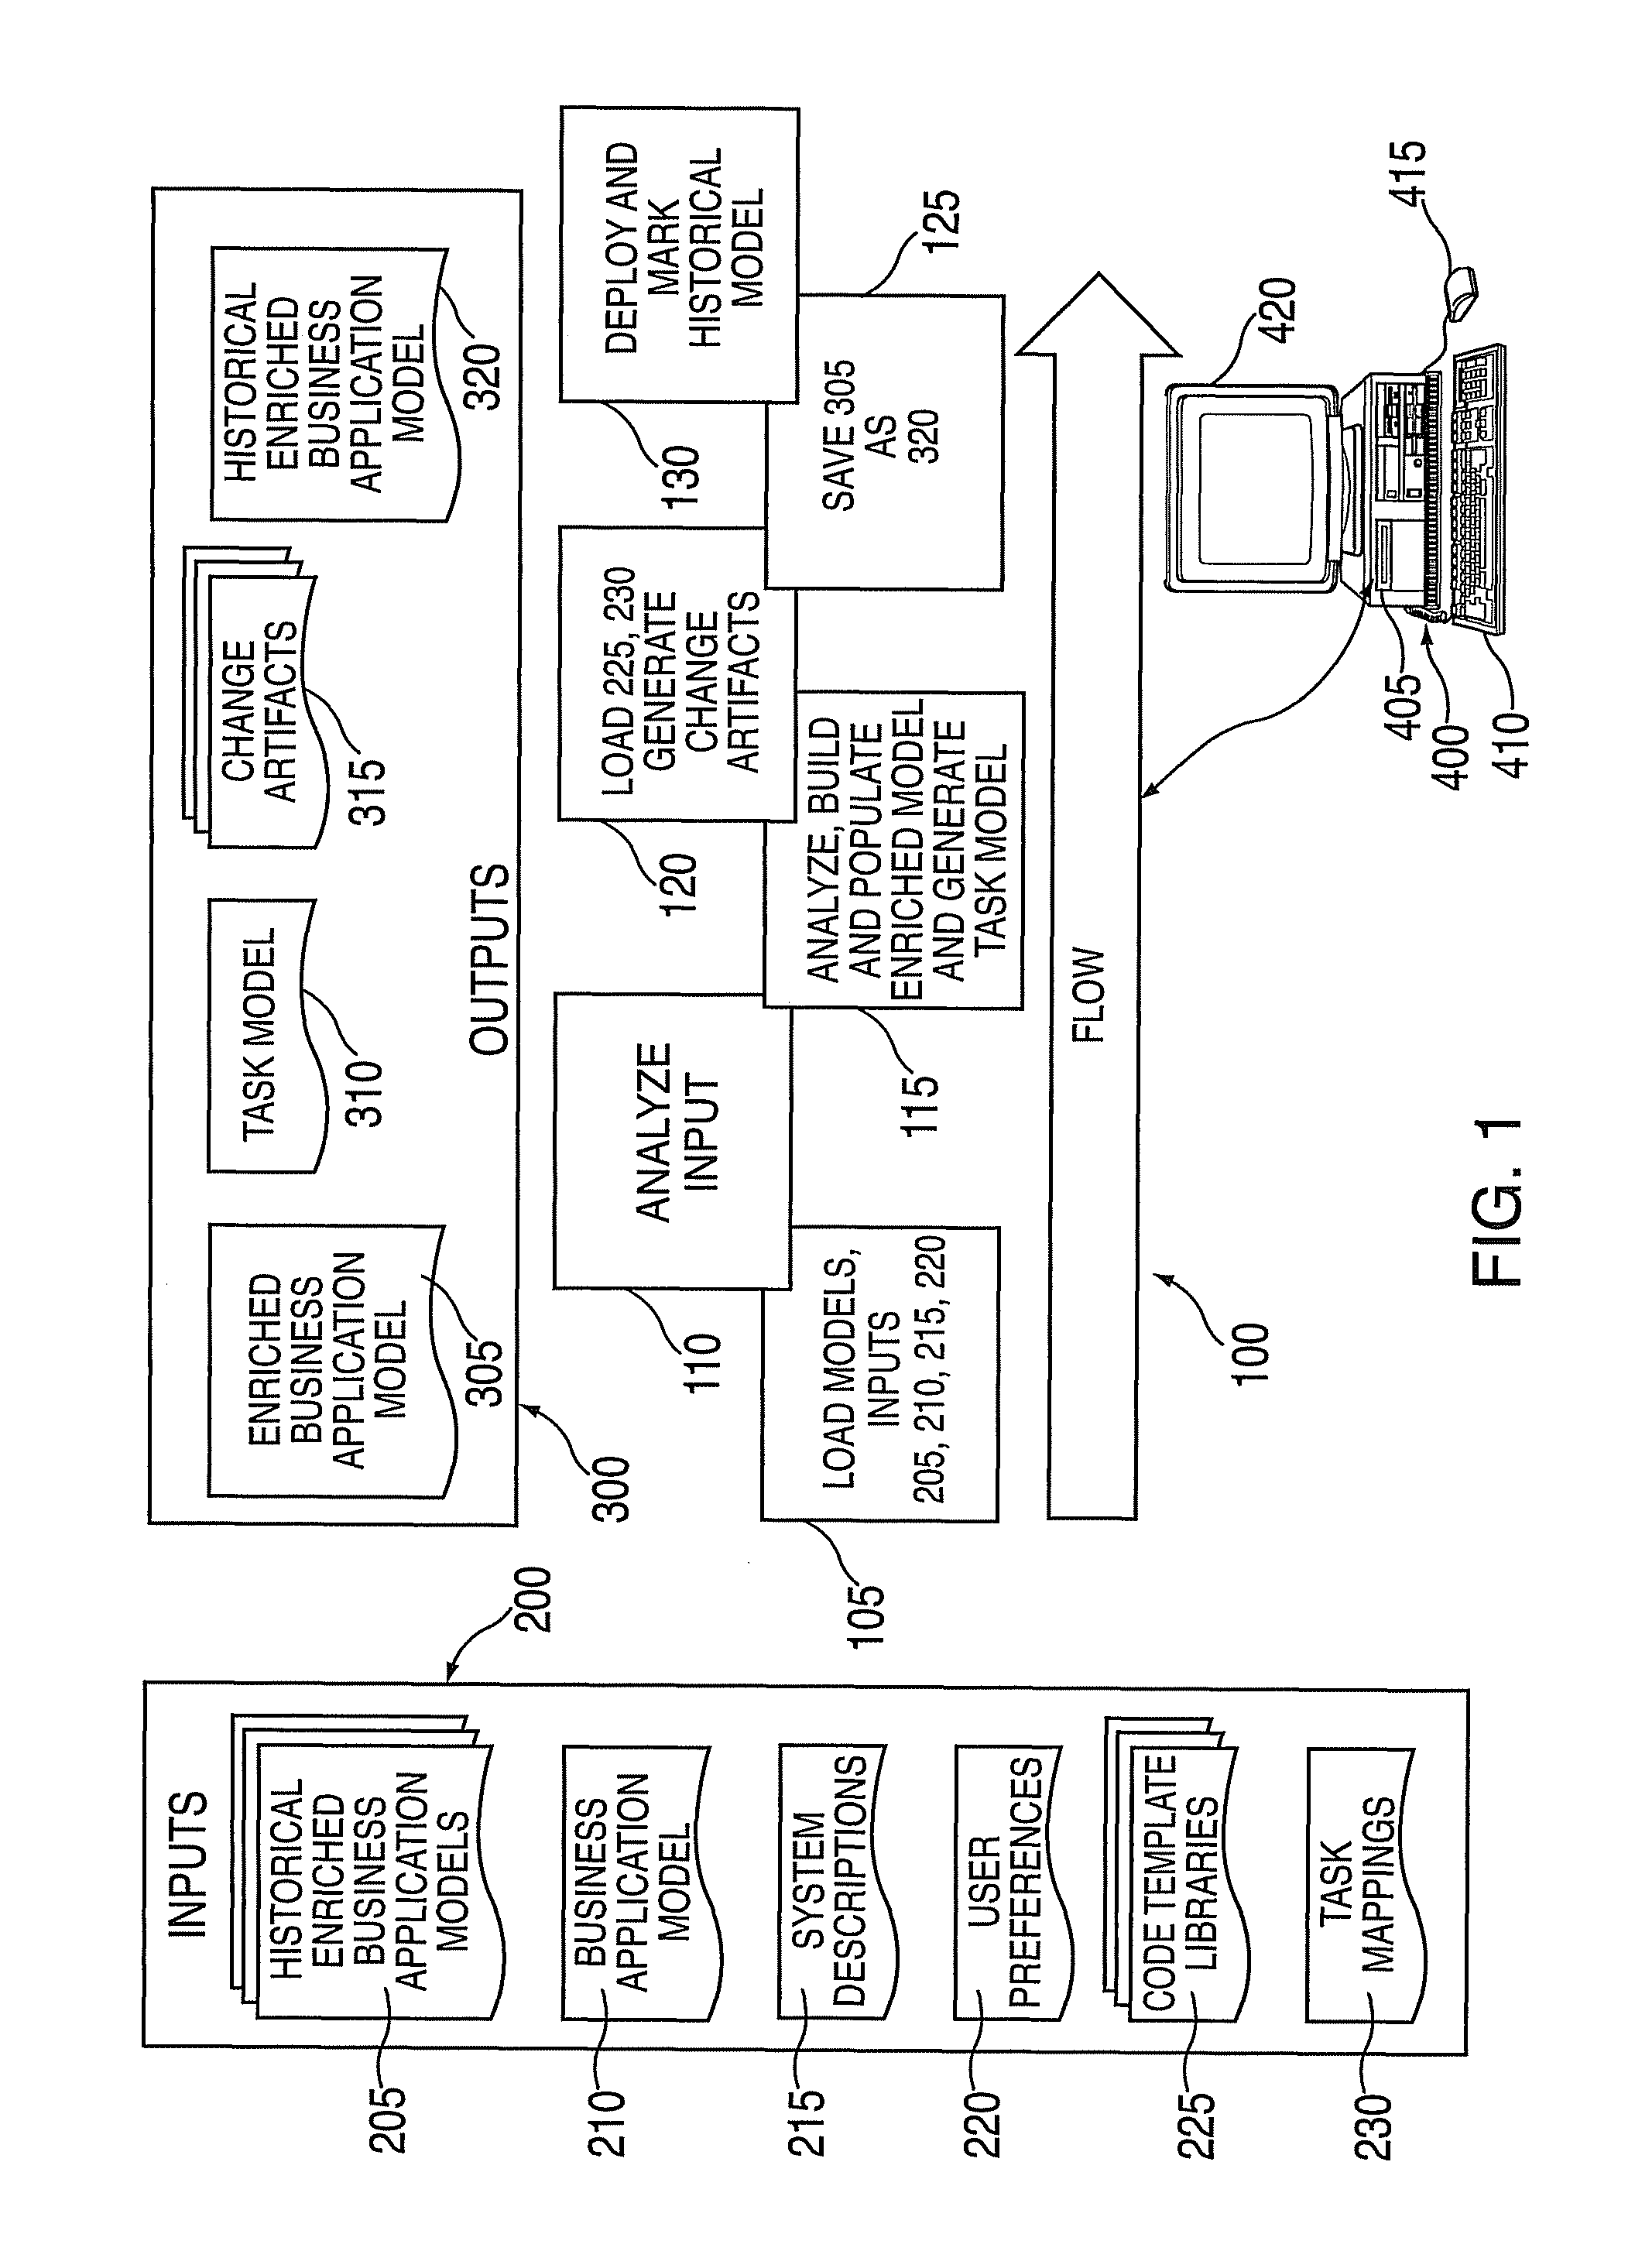 System and method for automated on demand replication setup